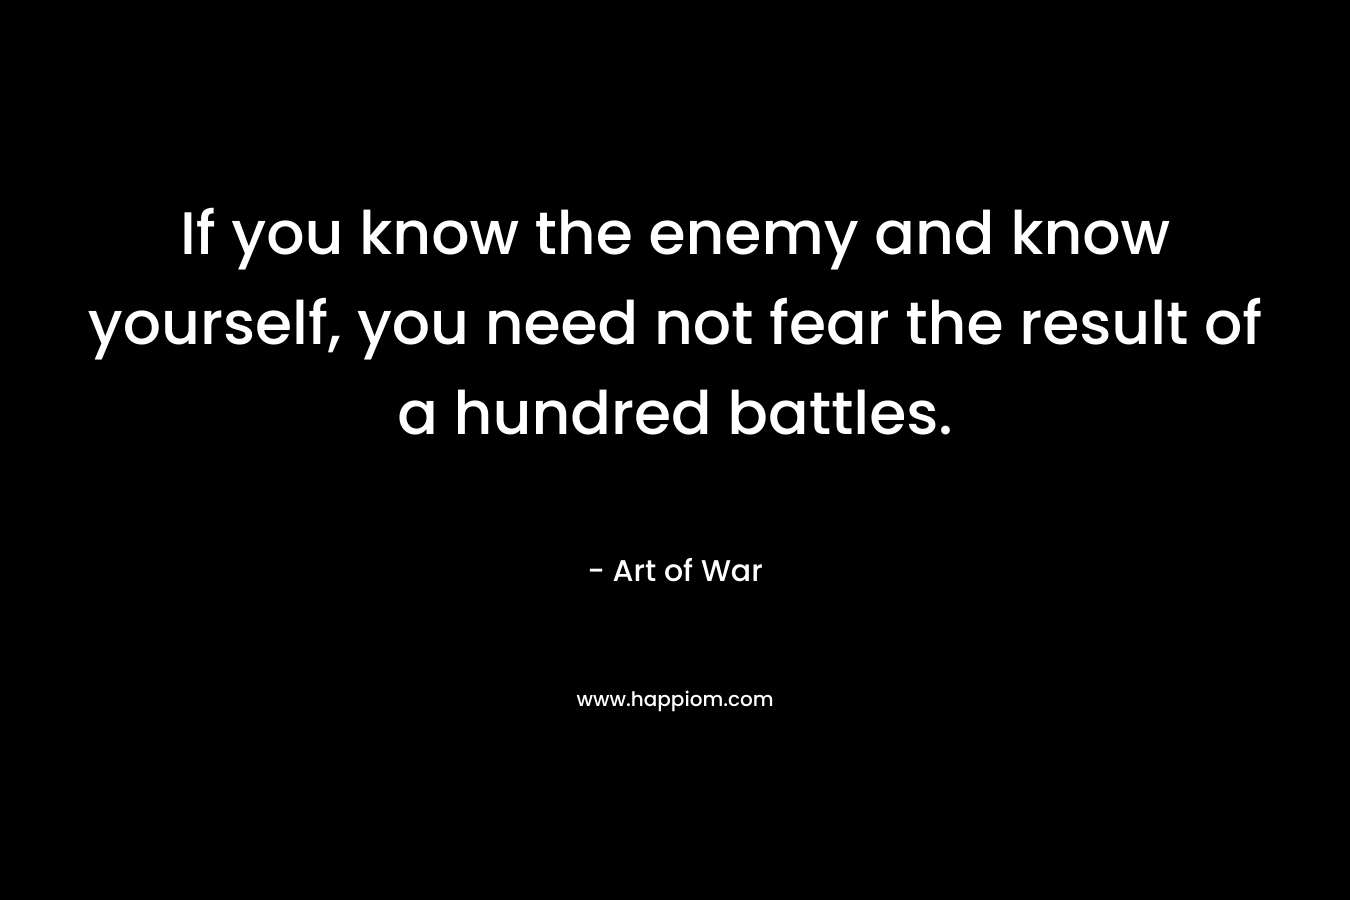 If you know the enemy and know yourself, you need not fear the result of a hundred battles.